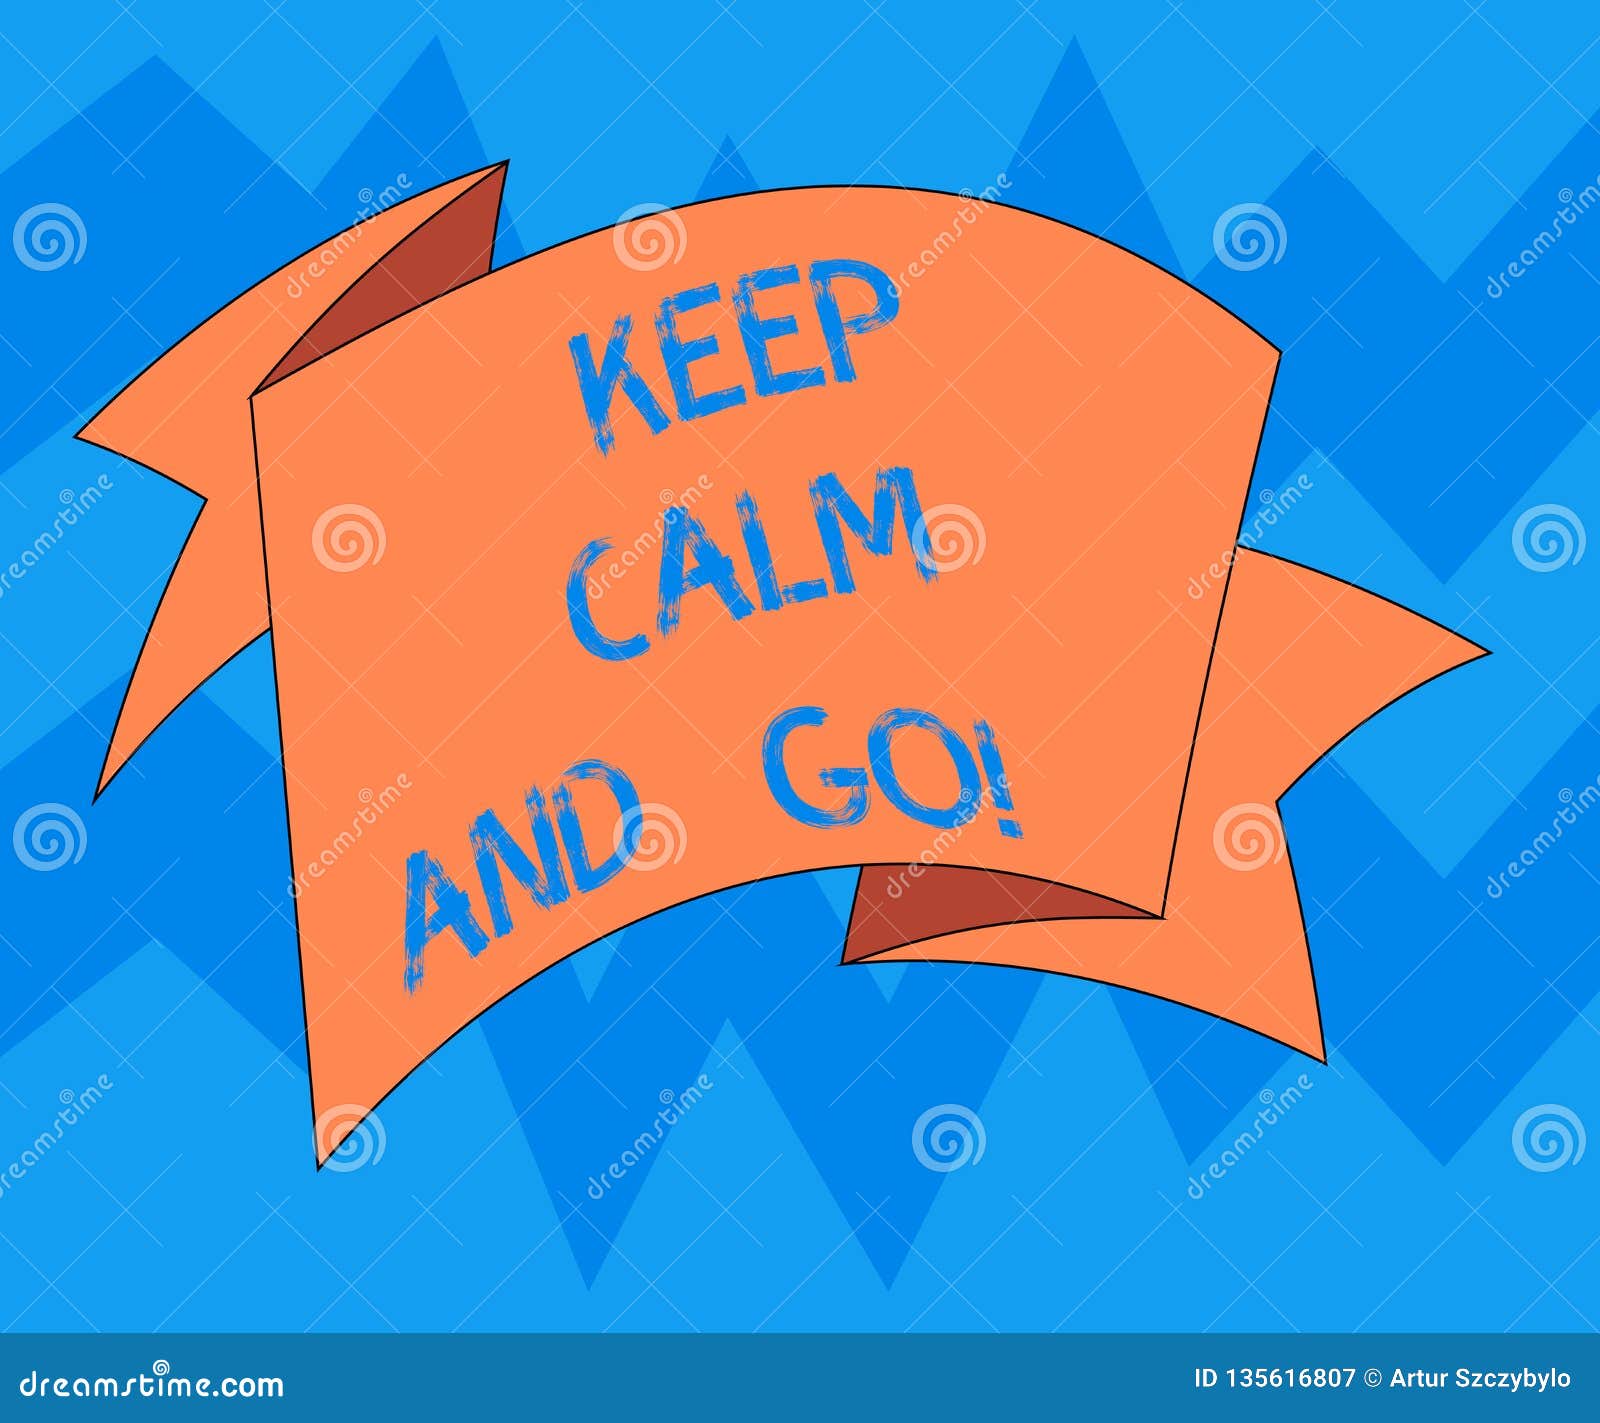 Text Sign Showing Keep Calm and Go. Conceptual Photo Be Relaxed and ...